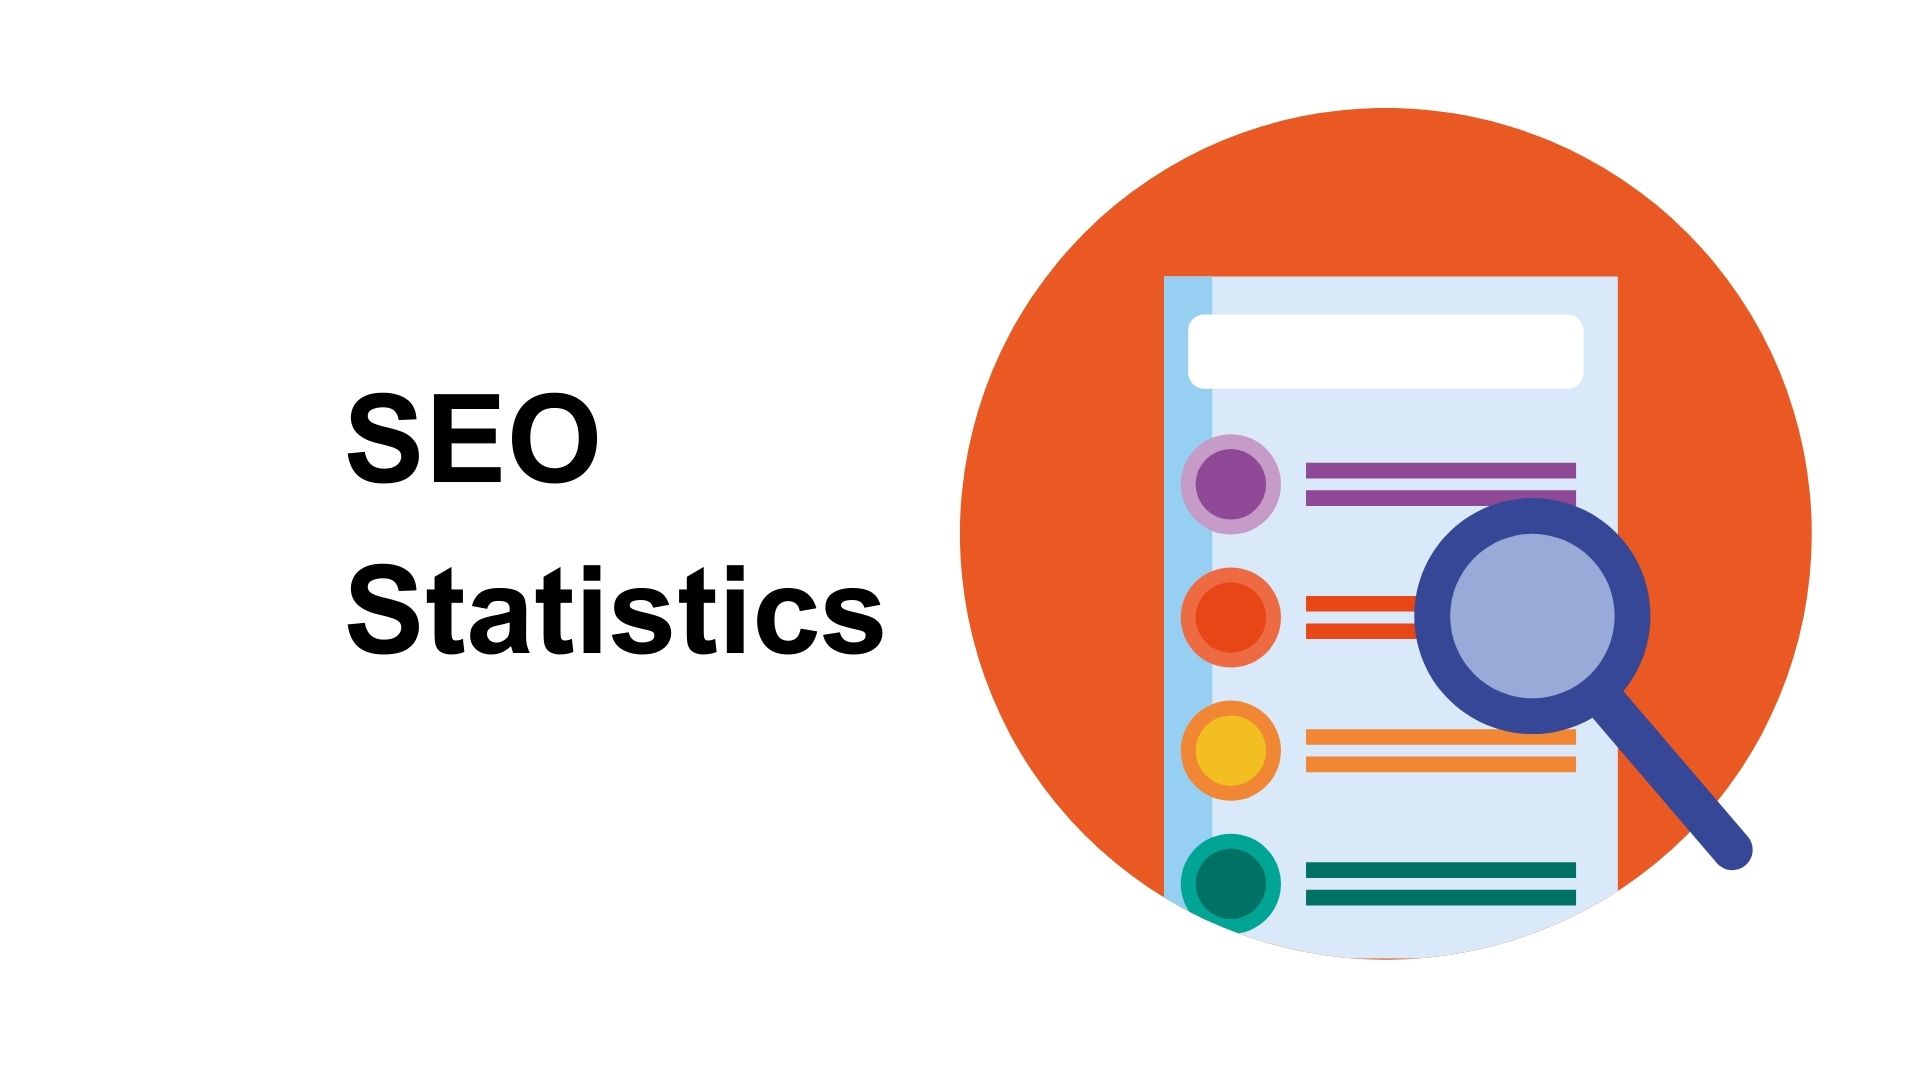 SEO Statistics By Organic Search Traffic, Ranking, Industry/Company, Business, Mobile, Platform, Country, Activity and Satisfaction Rate